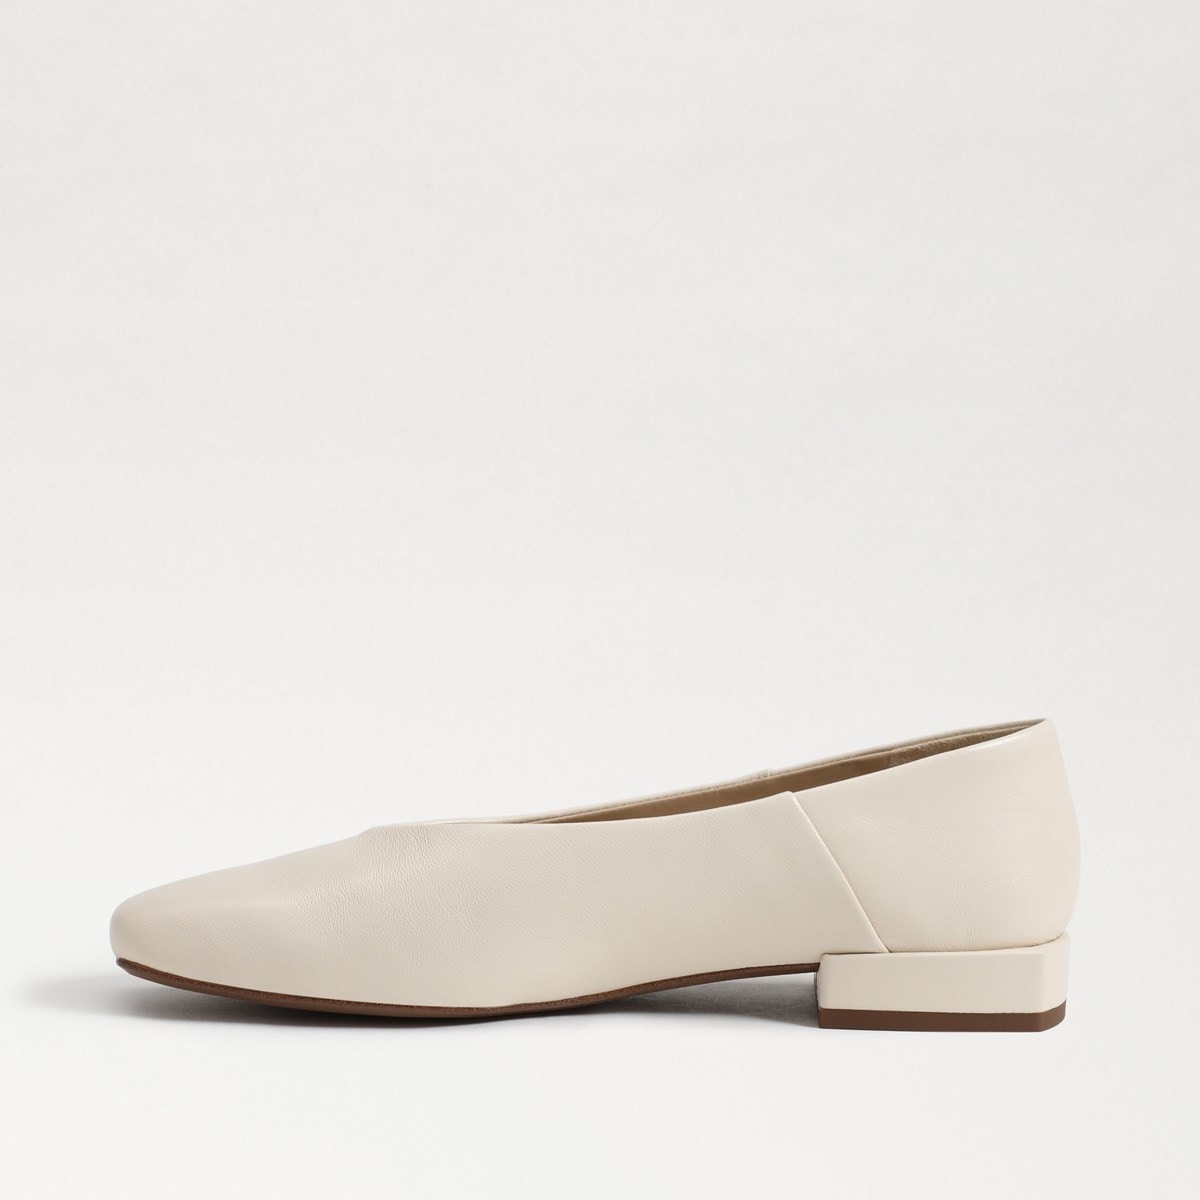 Sam Edelman Kasey Square Toe Ballet Flat | Women's Flats and Loafers